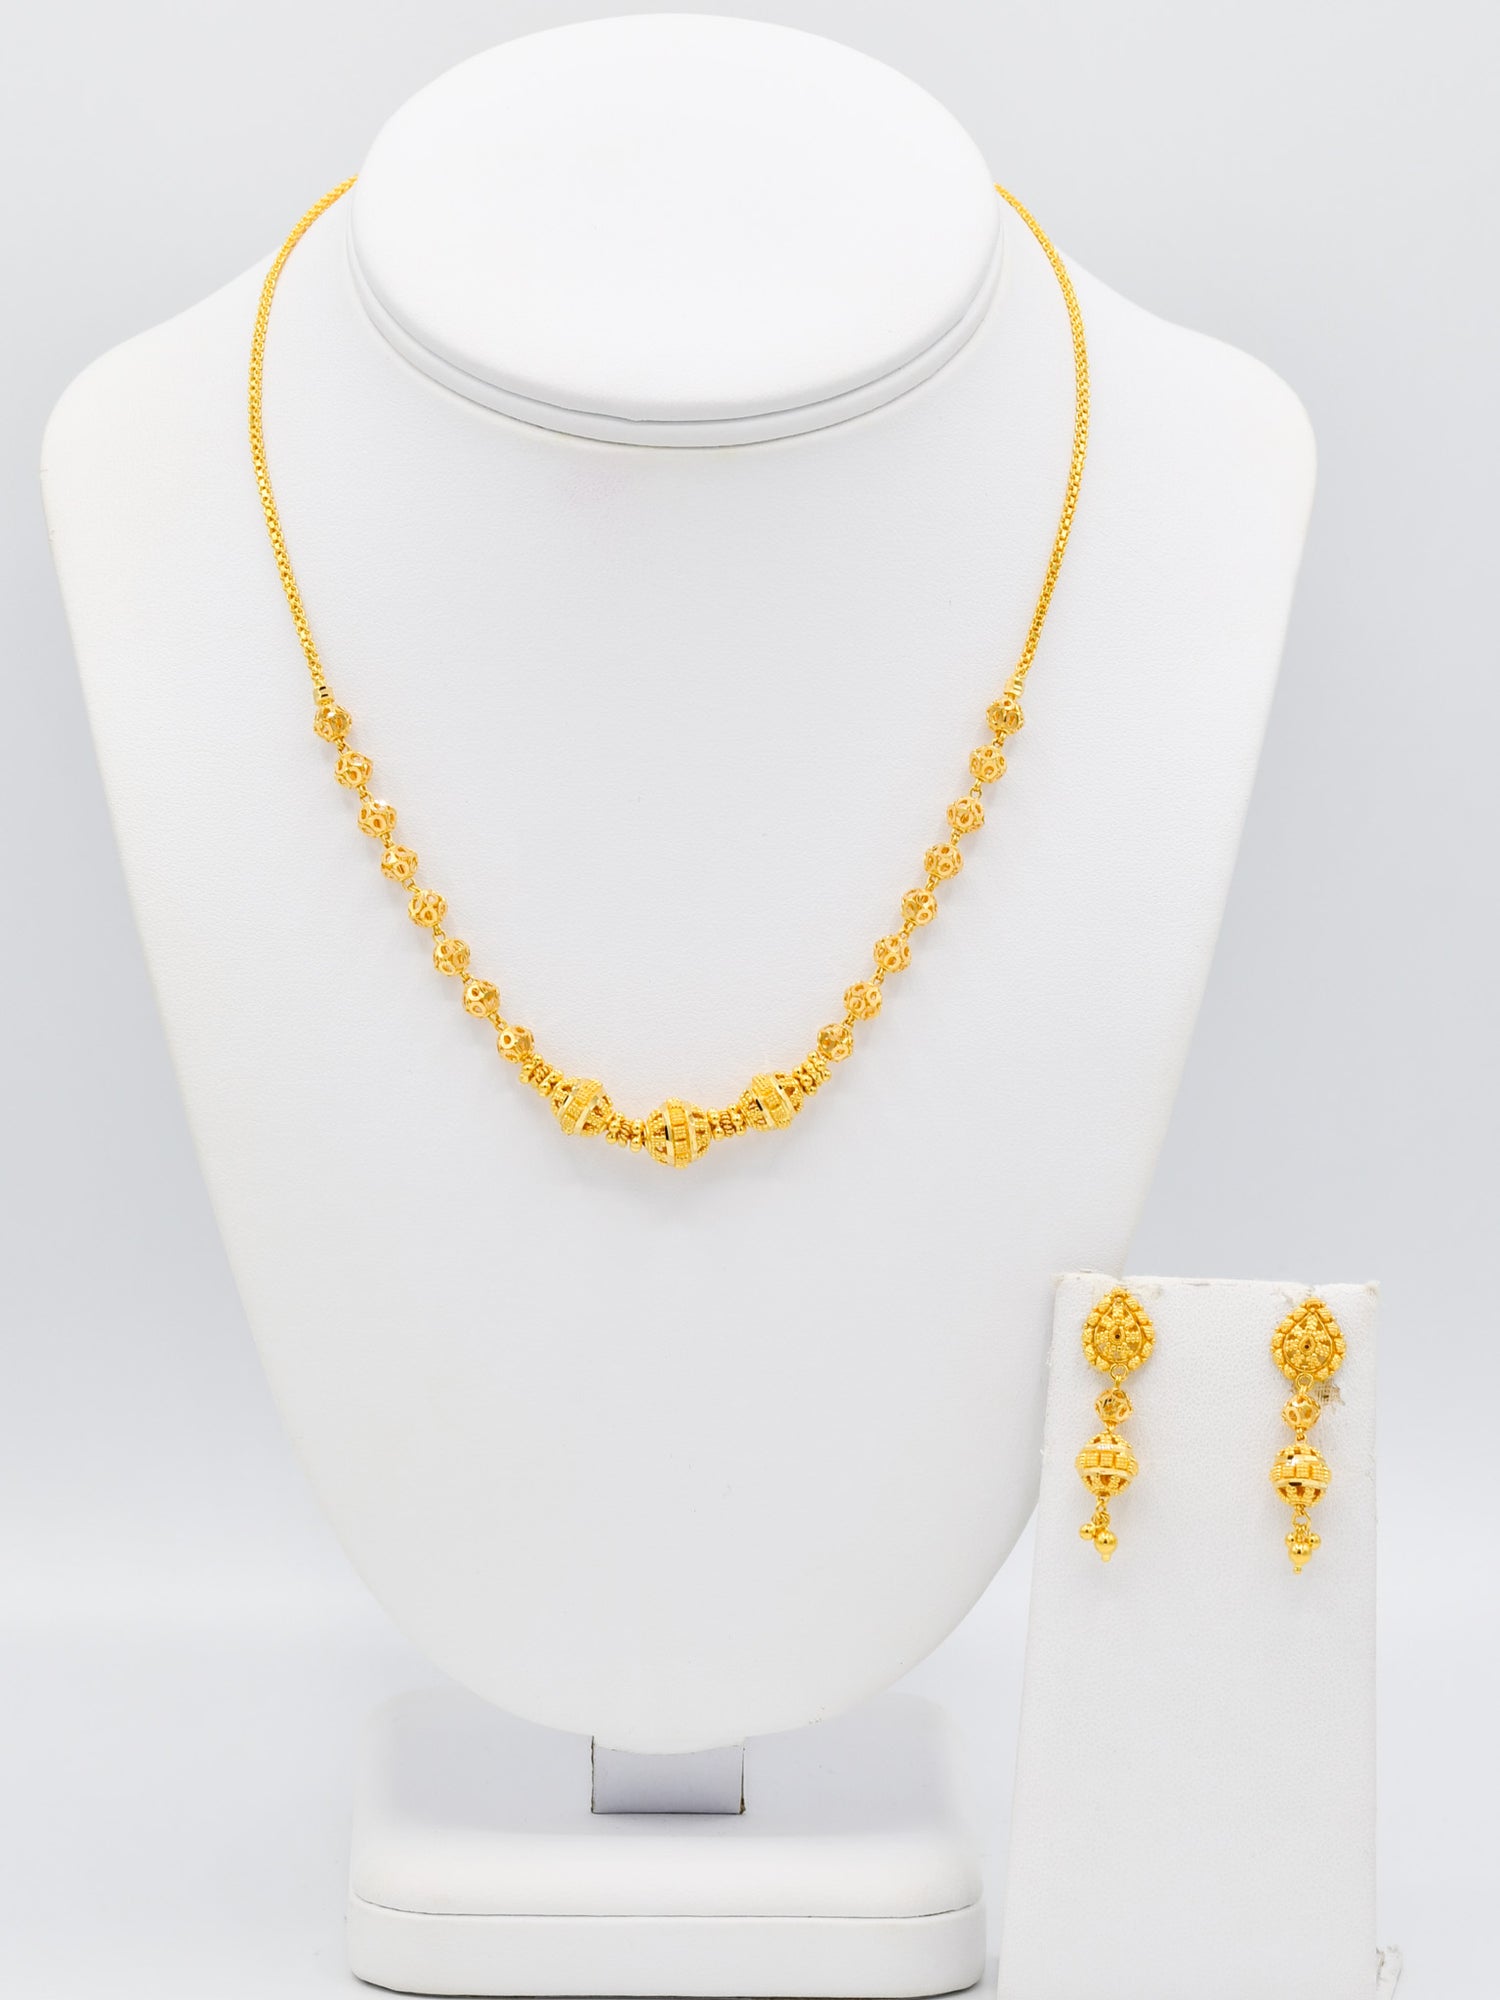 22ct Gold Ball Necklace Set - Roop Darshan